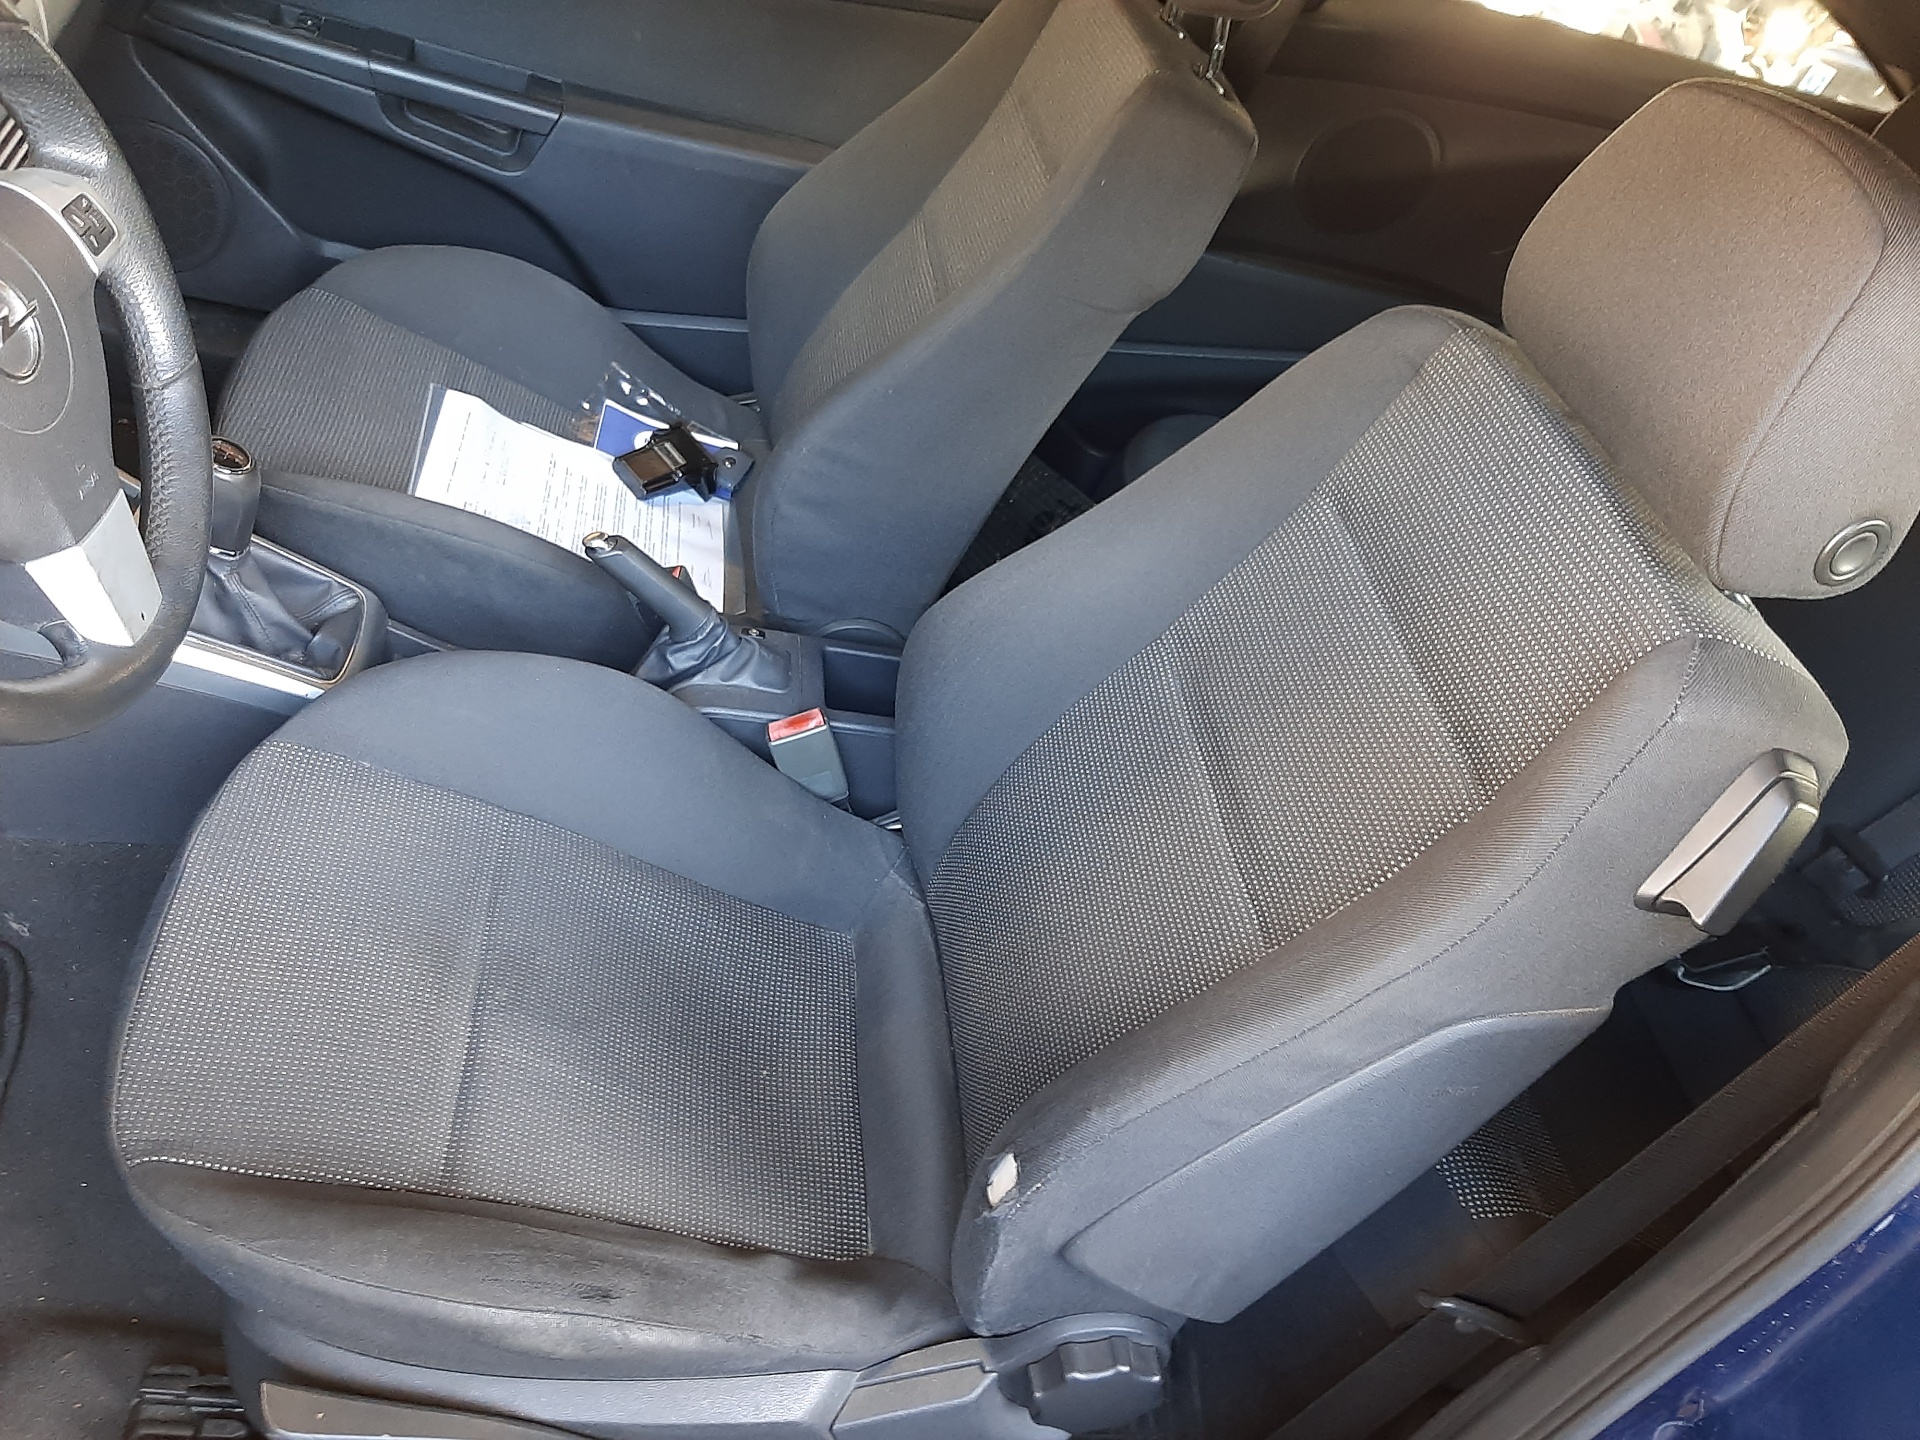 OPEL Astra H (2004-2014) Other Interior Parts 13275085 22664811